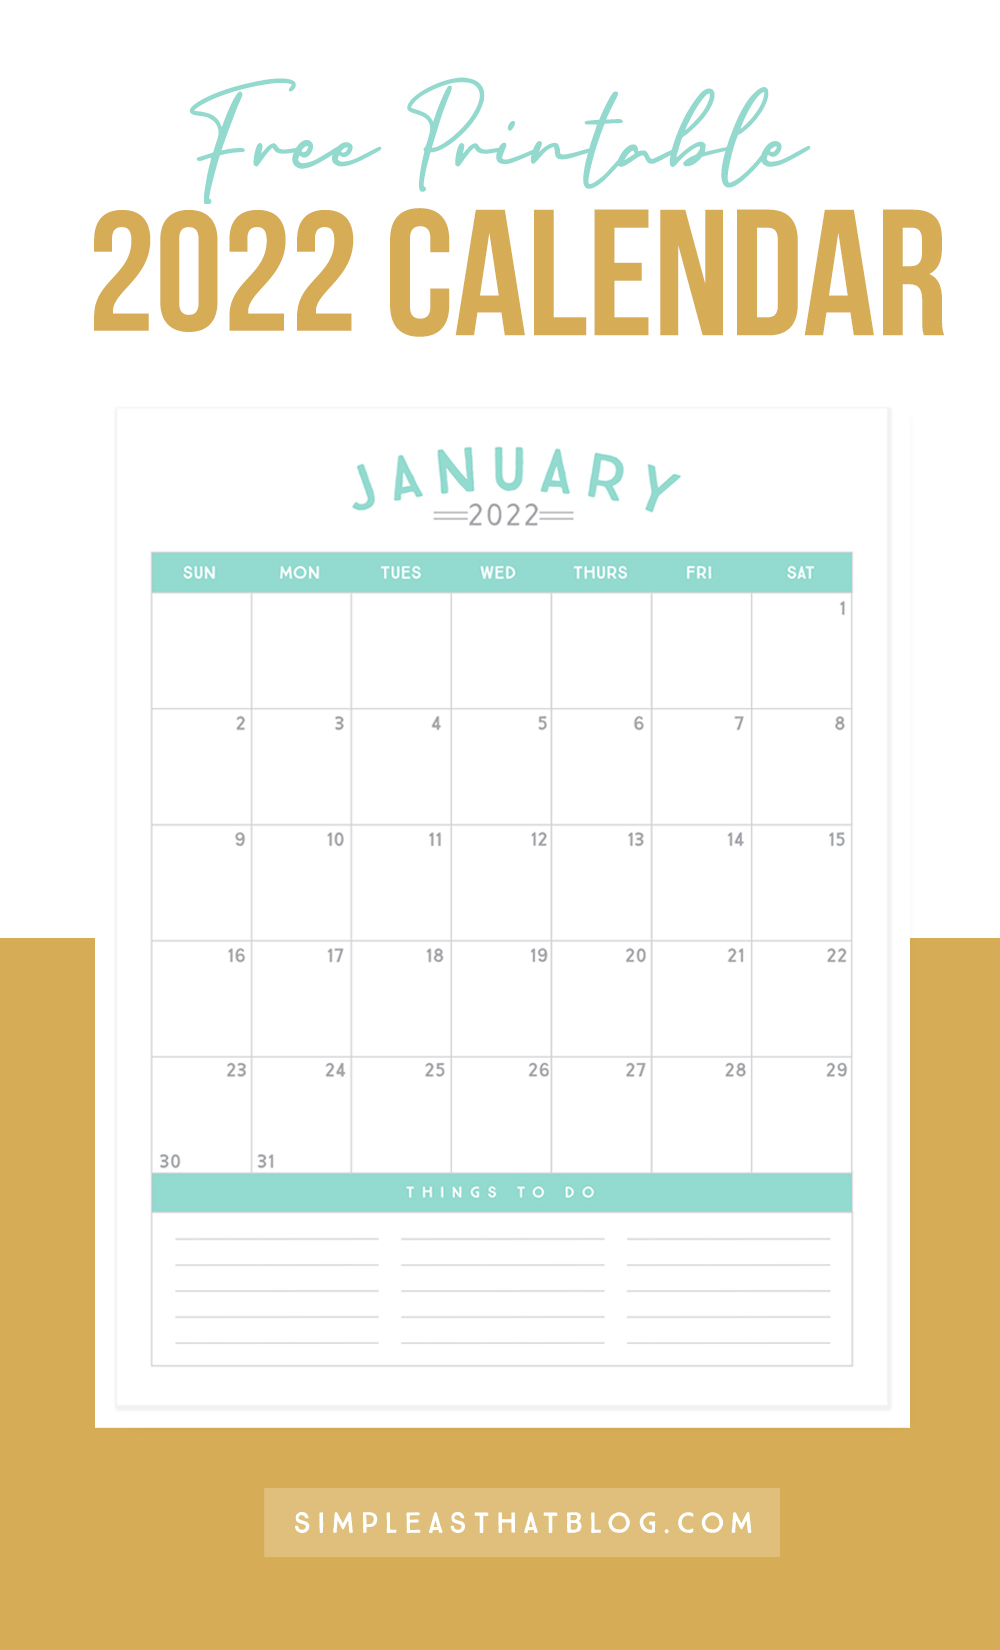 Kick off 2022 with a fresh start and a cute new calendar! This set of 12-month calendars are simple, stream-lined and the perfect planning tool to help you get organized in the new year. Click the link below to download our free printable 2022 calendar!